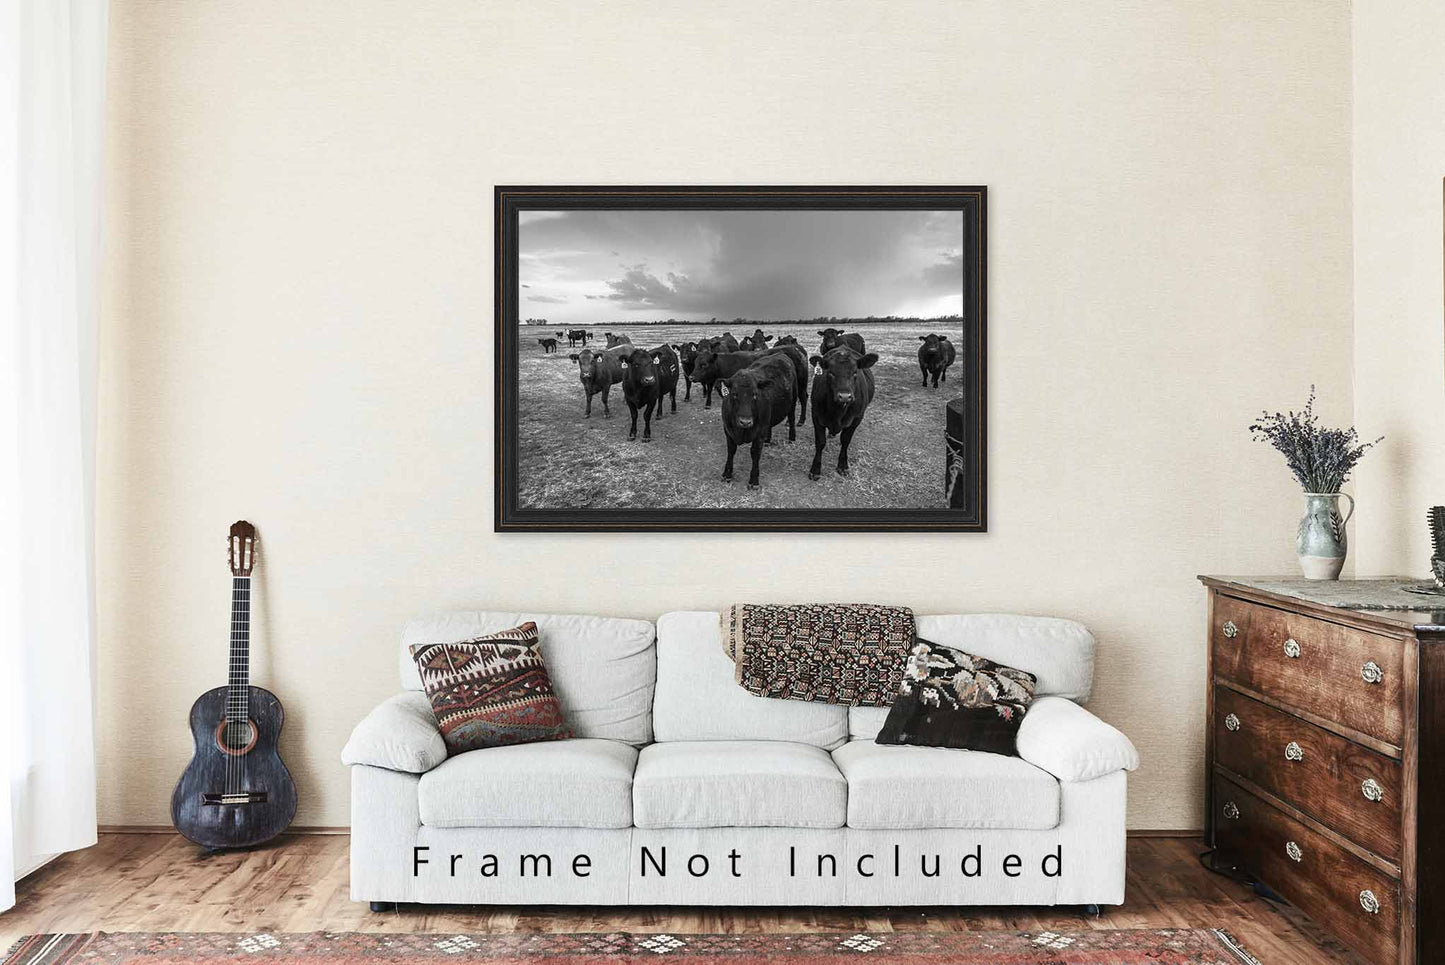 Cow Photography Print | Angus Cattle Herd Picture | Kansas Wall Art | Black and White Photo | Farmhouse Decor | Not Framed